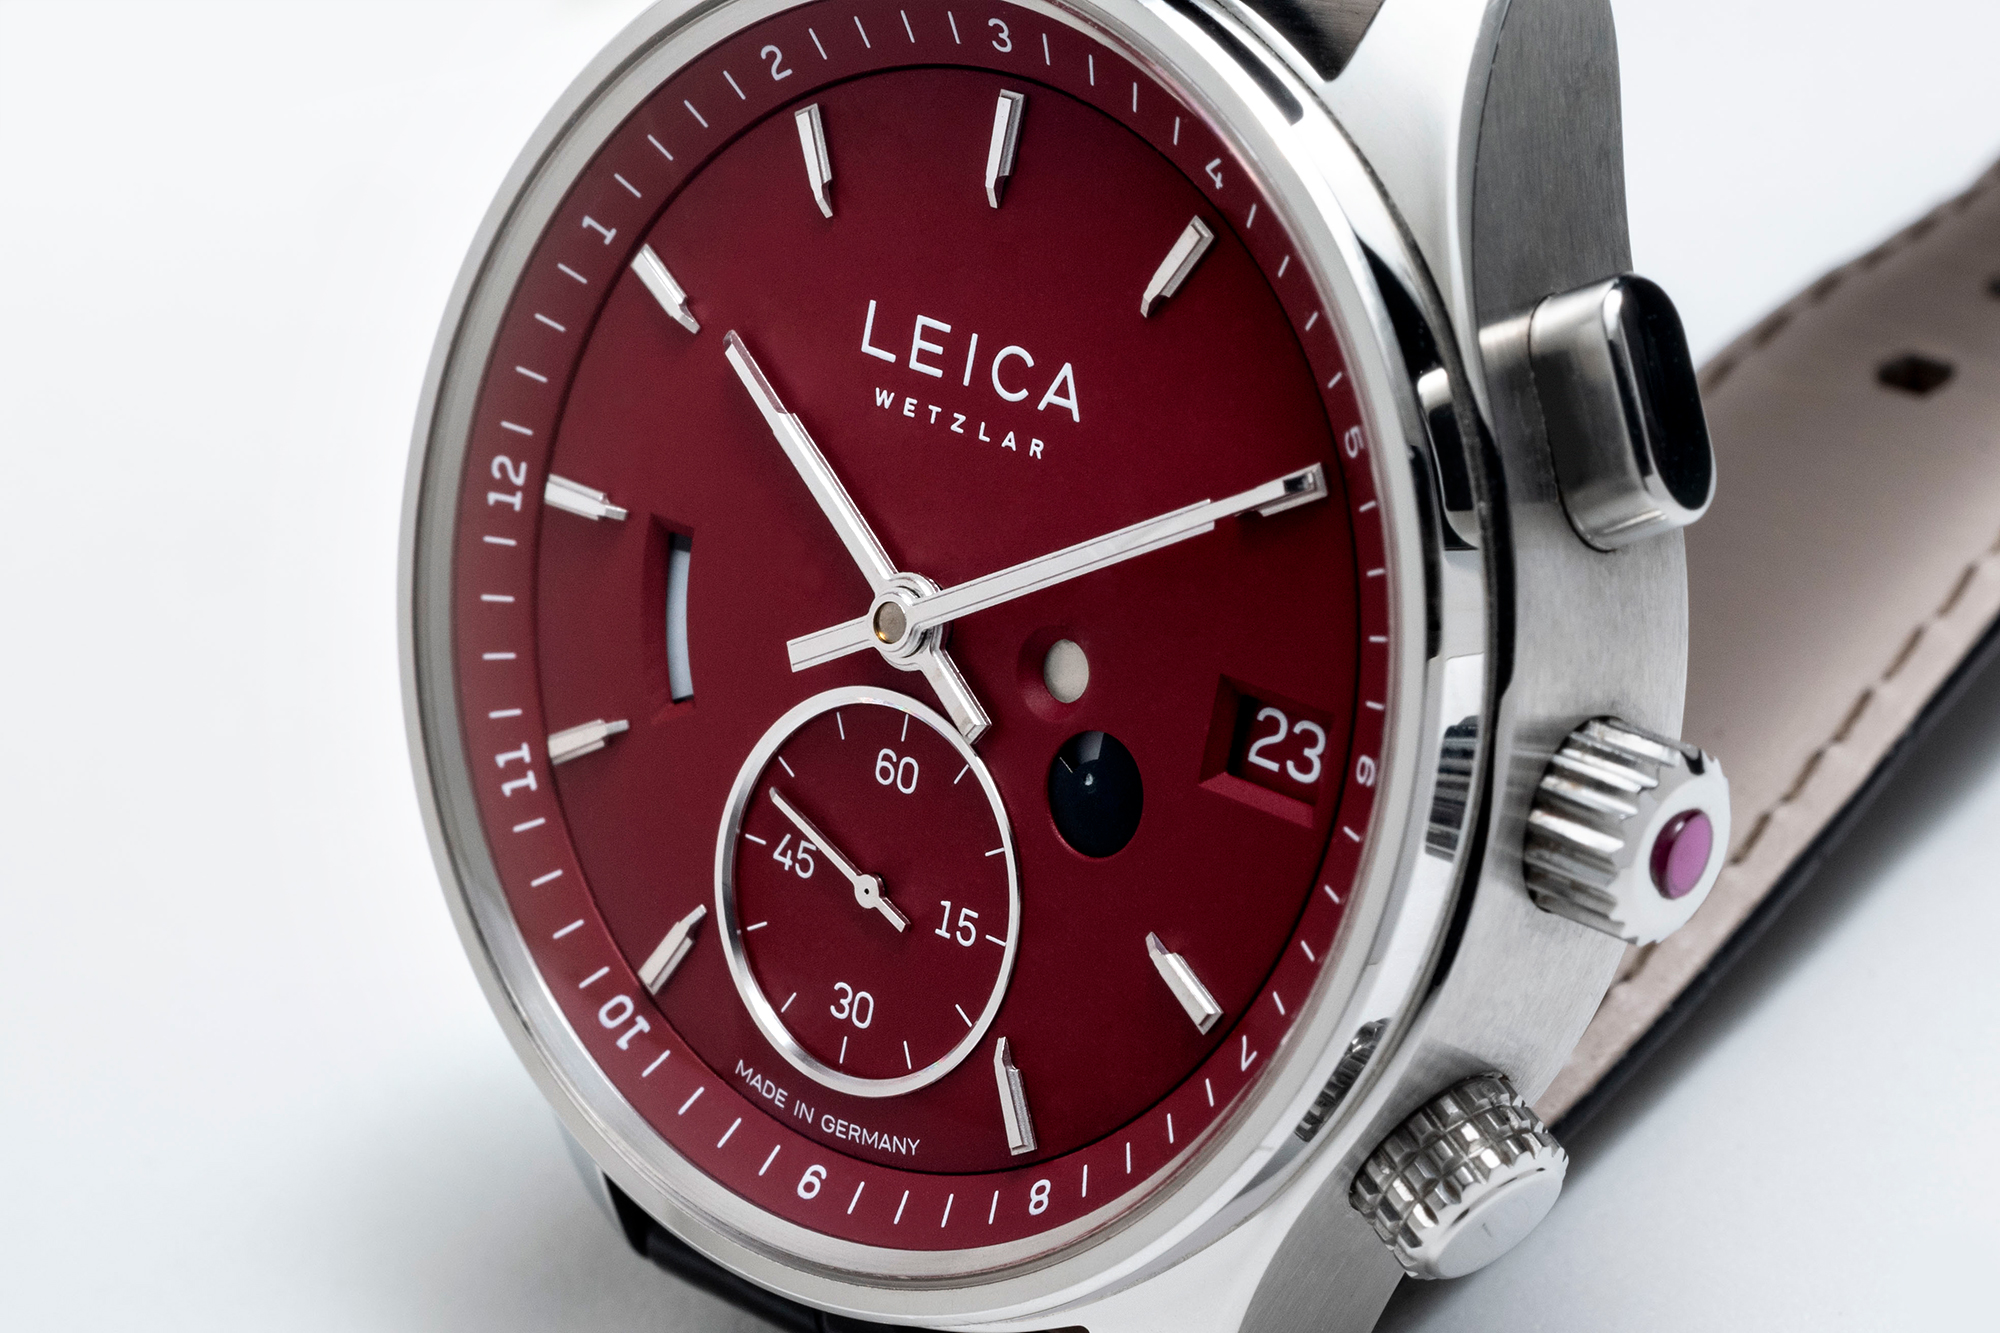 Leica L2 watch with GMT 